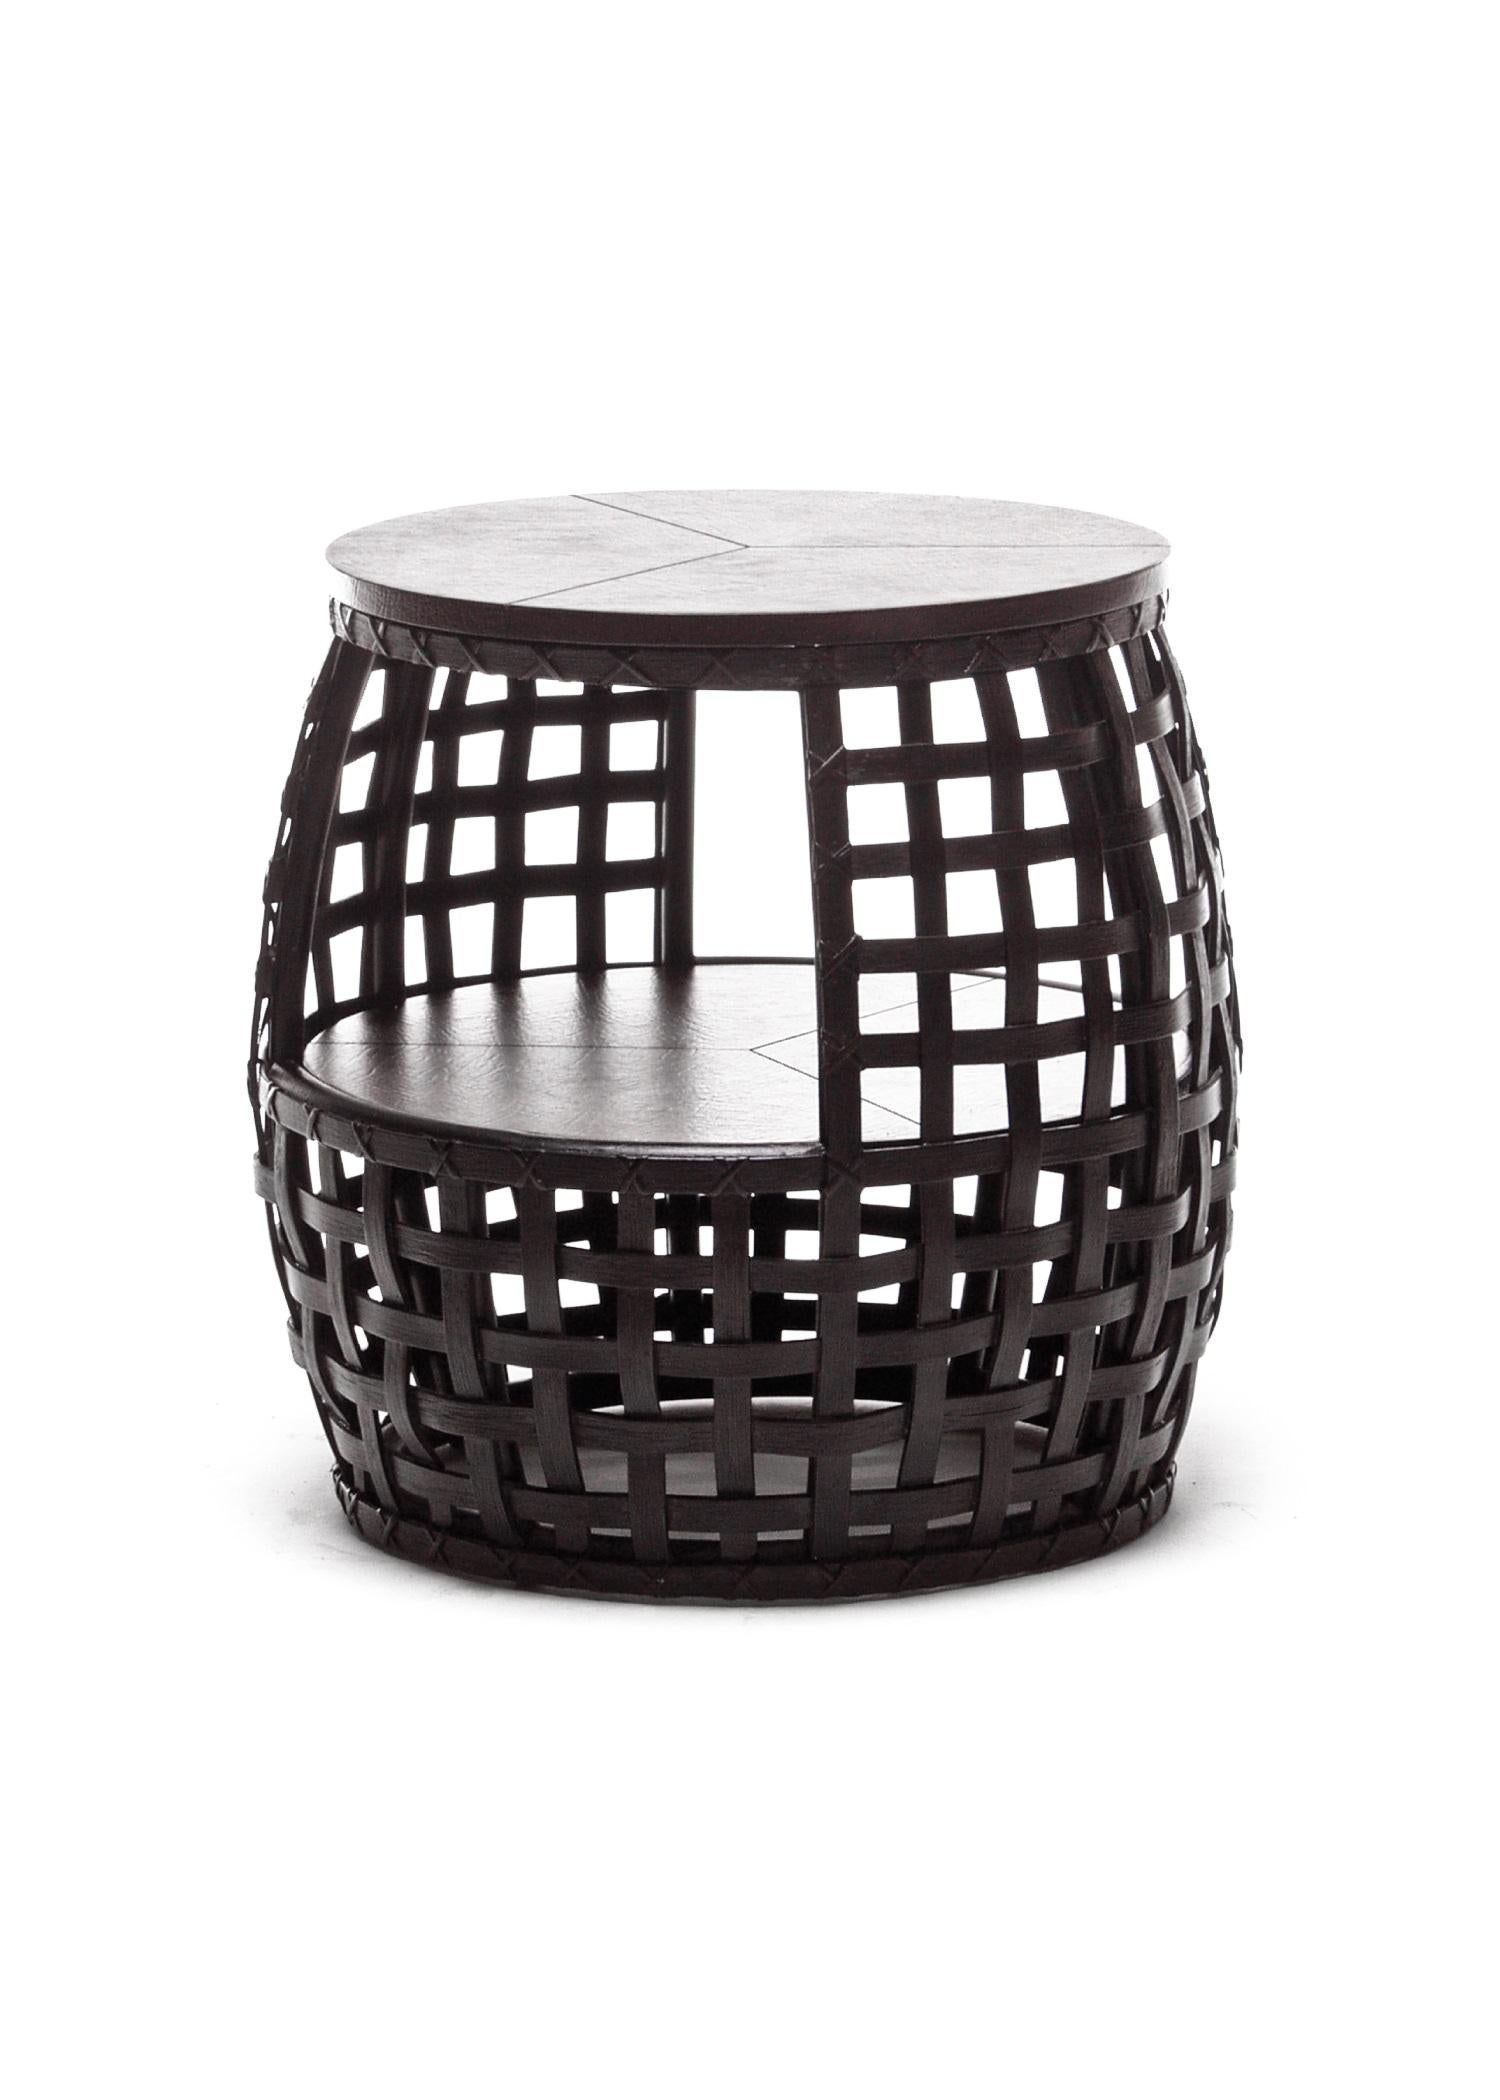 Outdoor Matilda end table by Kenneth Cobonpue.
Materials: Polyethelene. Aluminum. Glass. 
Also available in other colors and for indoors.
Dimensions:
Glass top diameter 45cm x height 6mm shelve diameter 50.5cm x height 6mm
Table diameter 56cm x